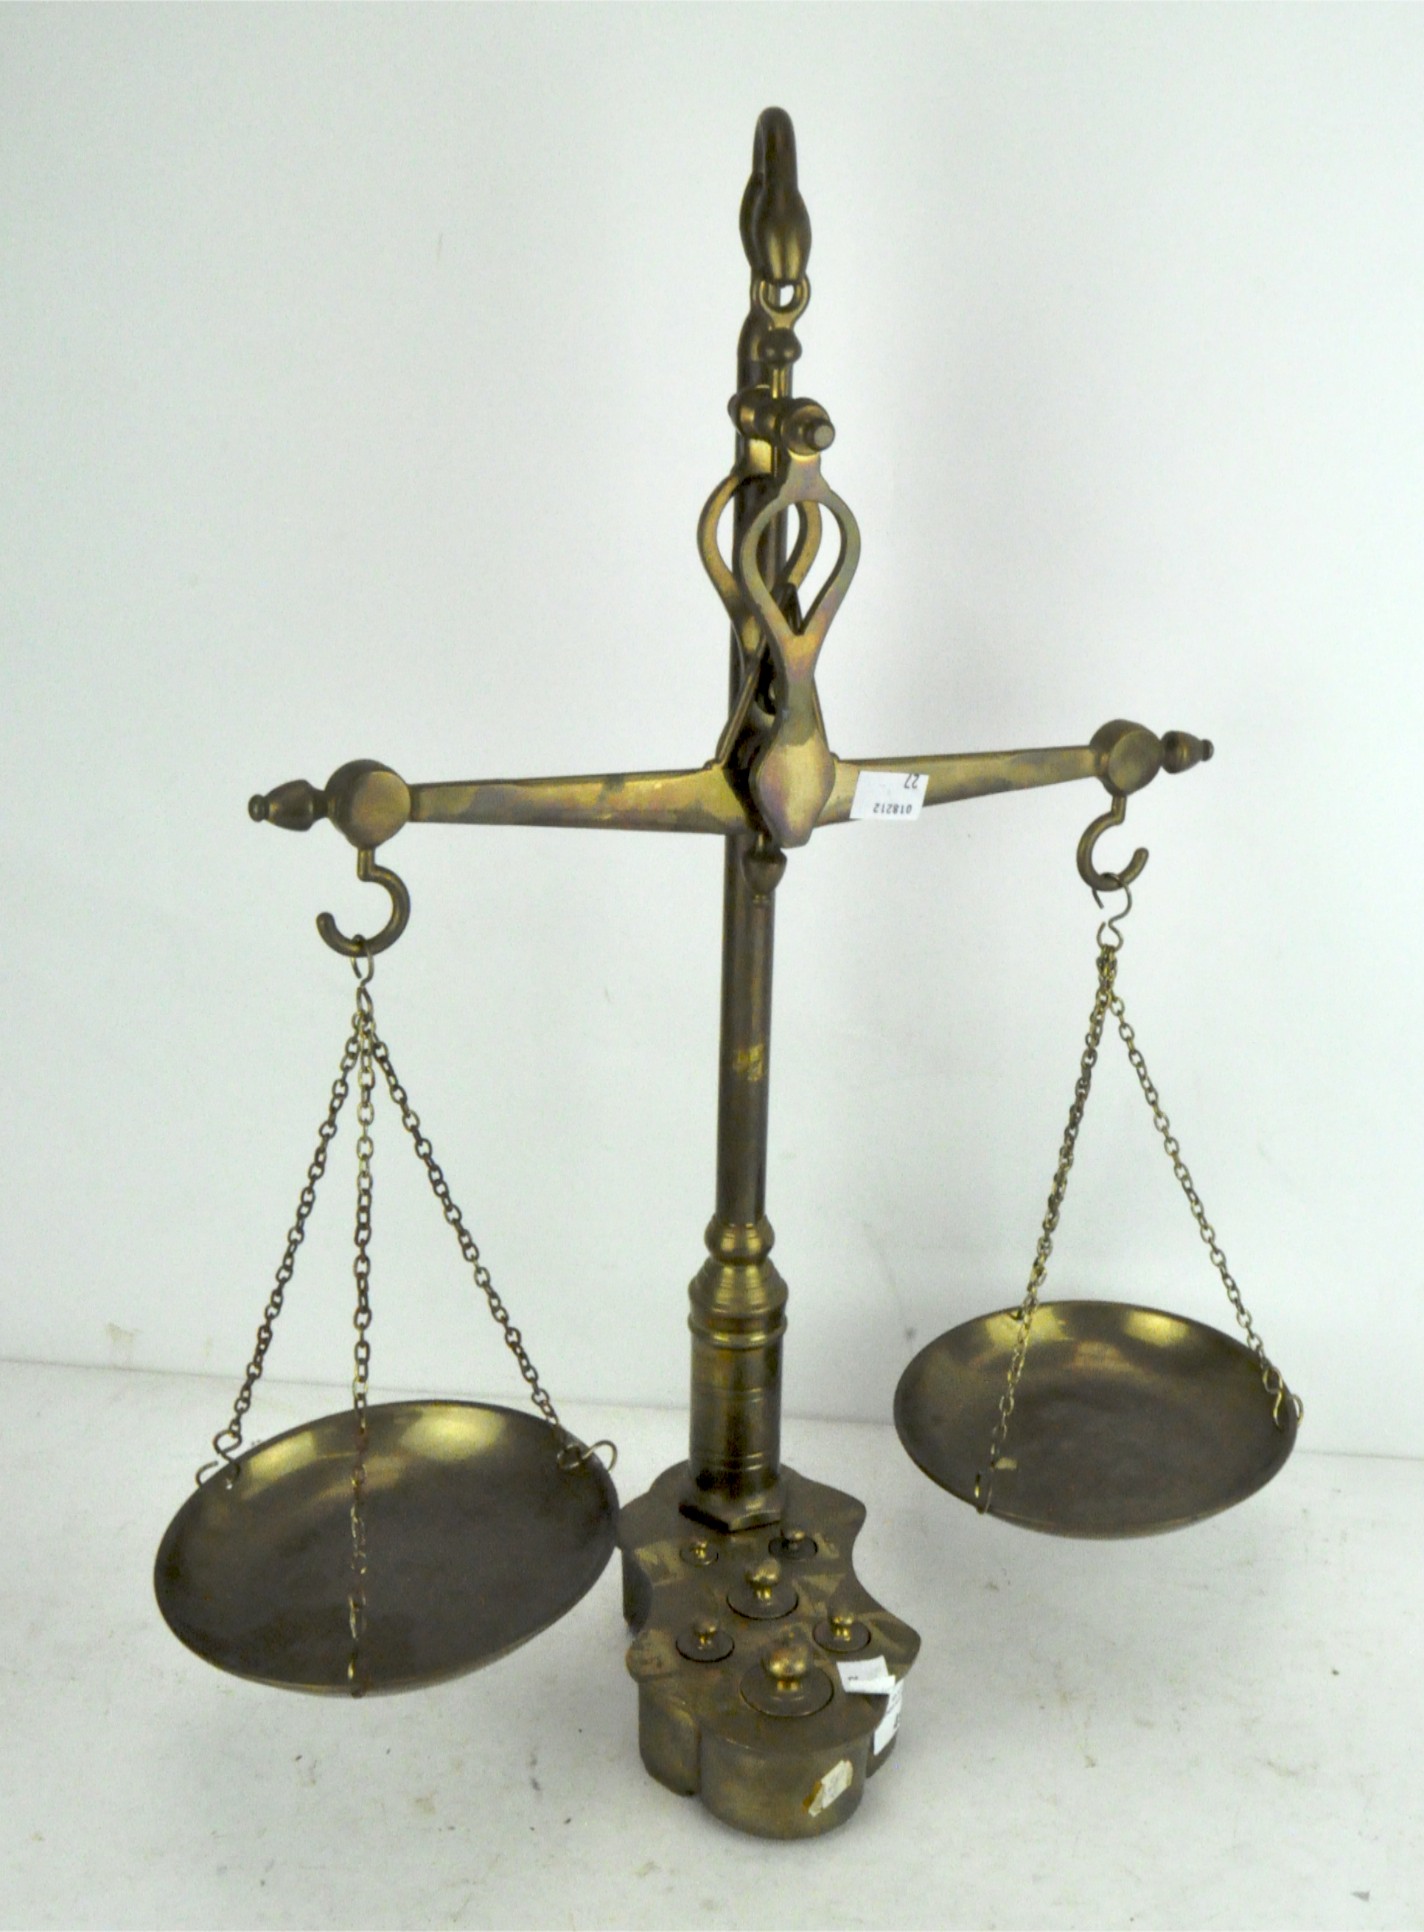 A set of early 20th century brass scales with weights,